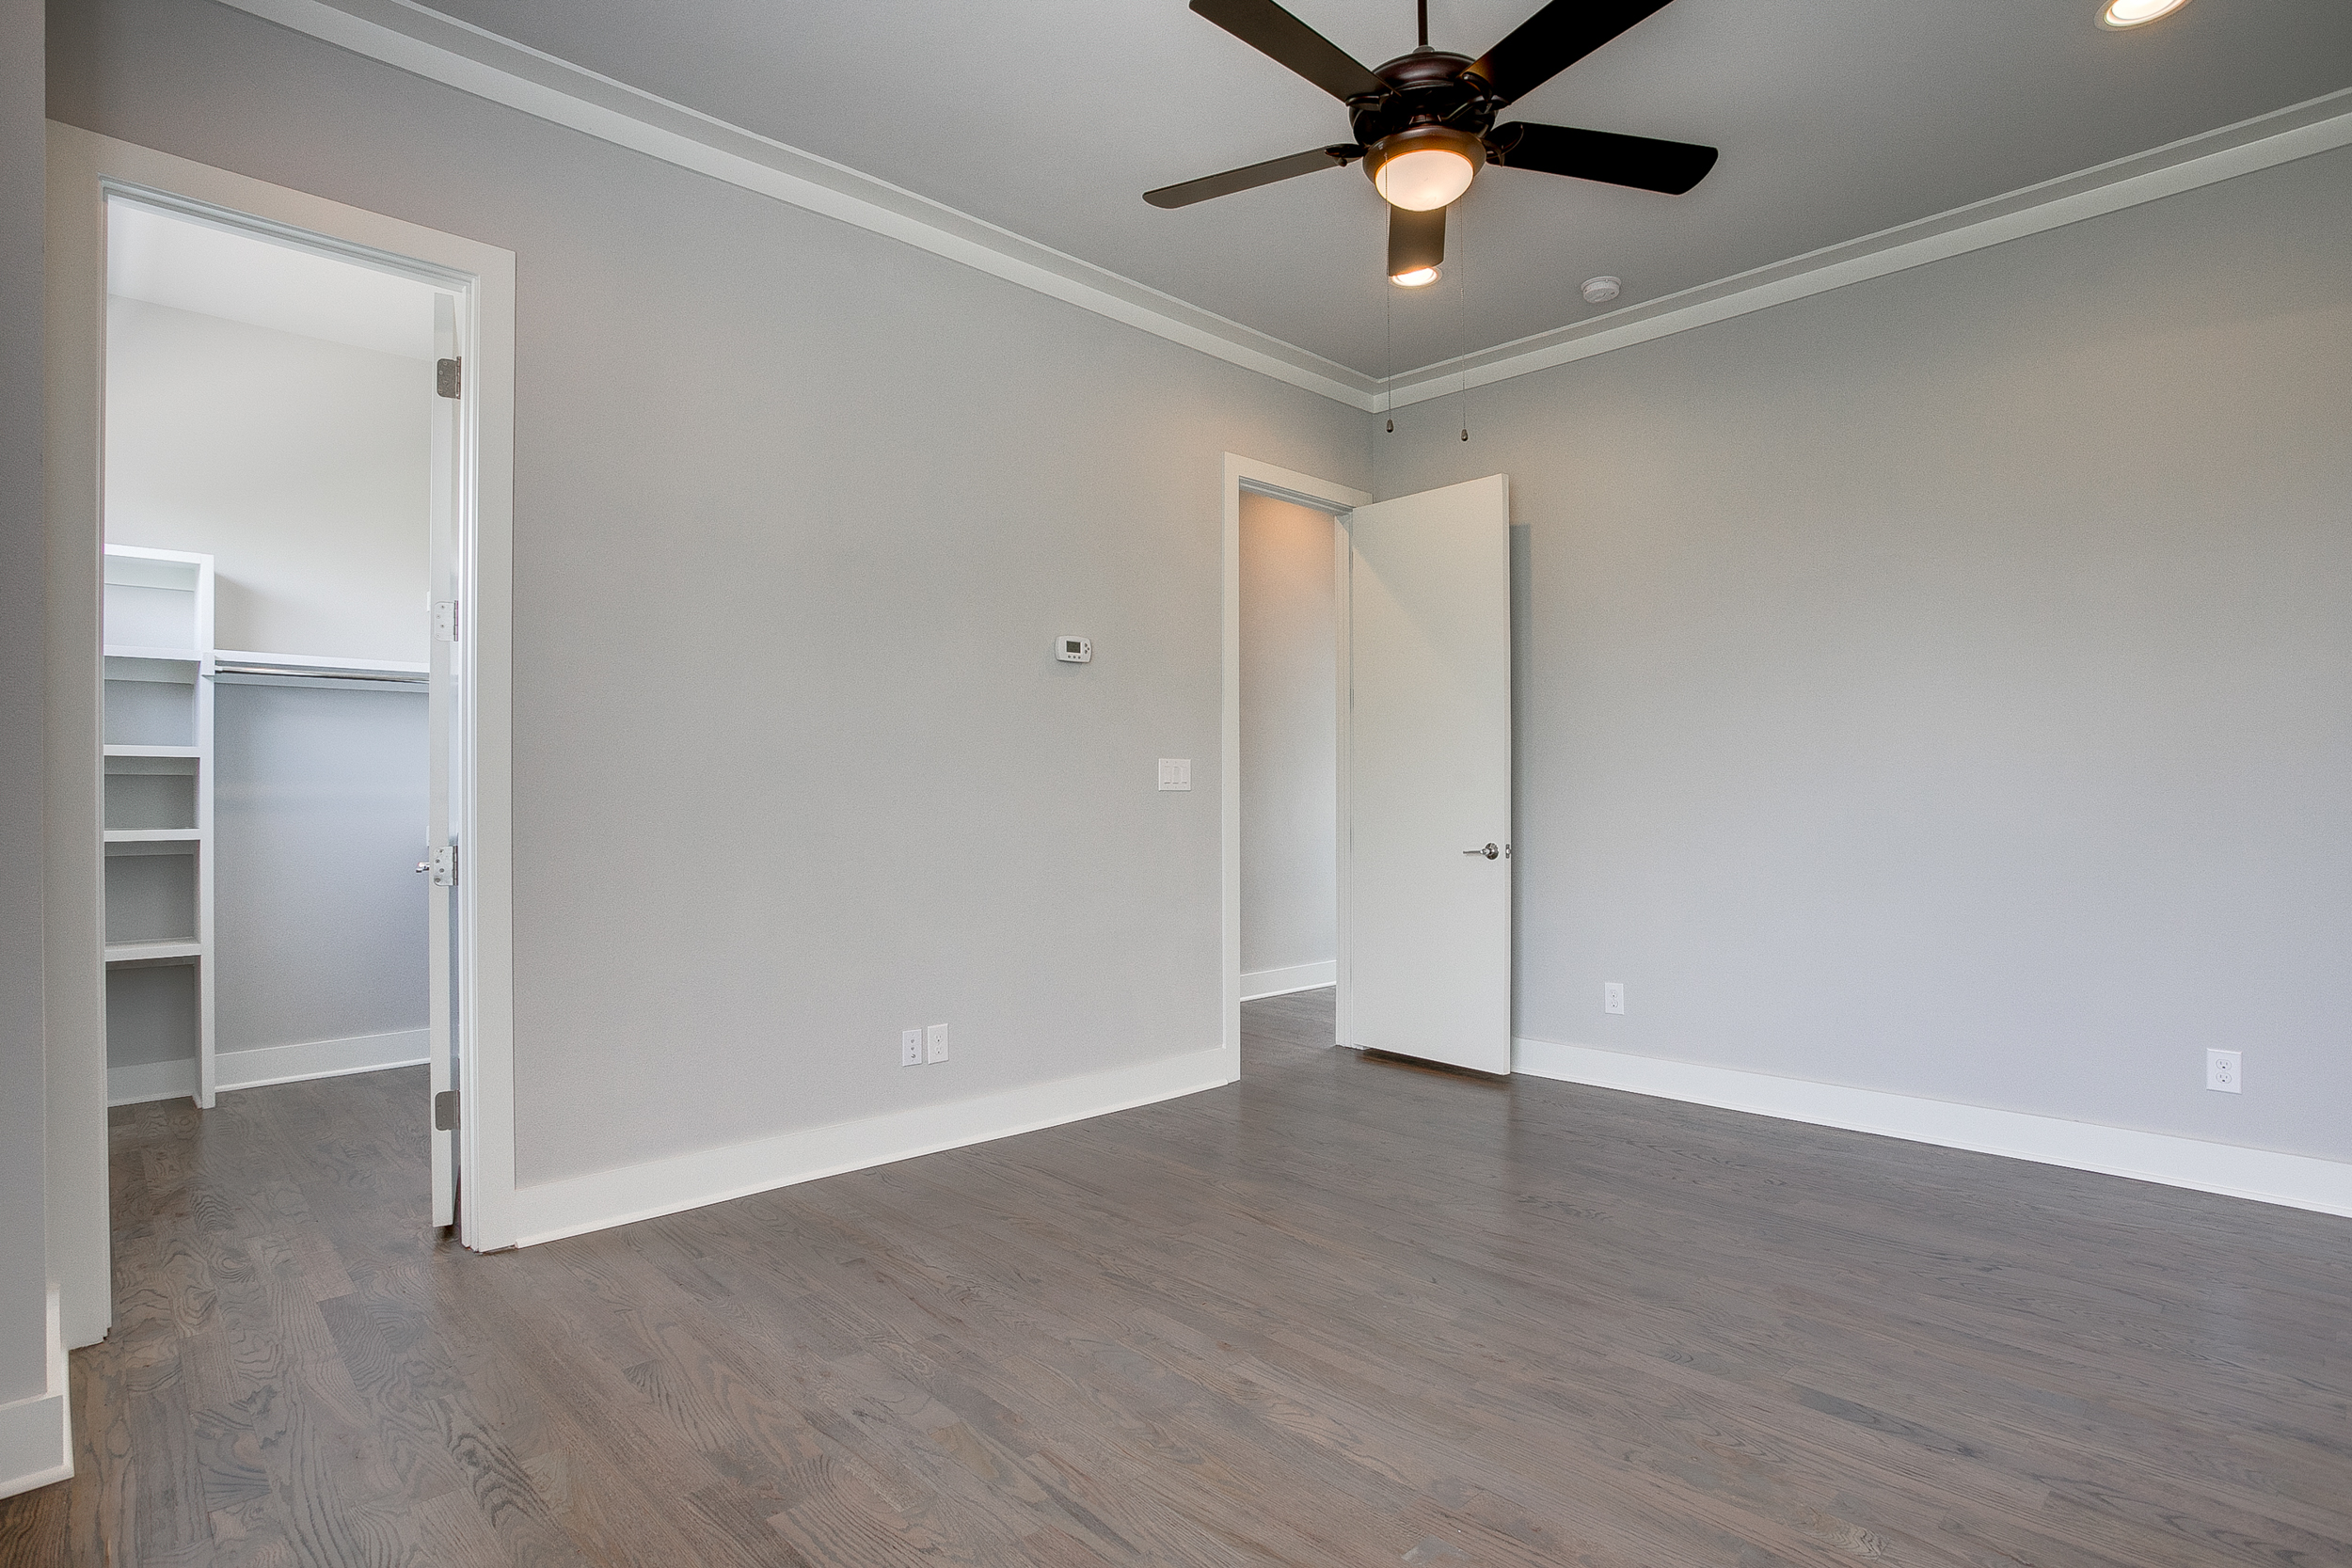 Interior view of an empty bedroom with dark hardwood floors, a ceiling fan, and a view into the walk-in closet